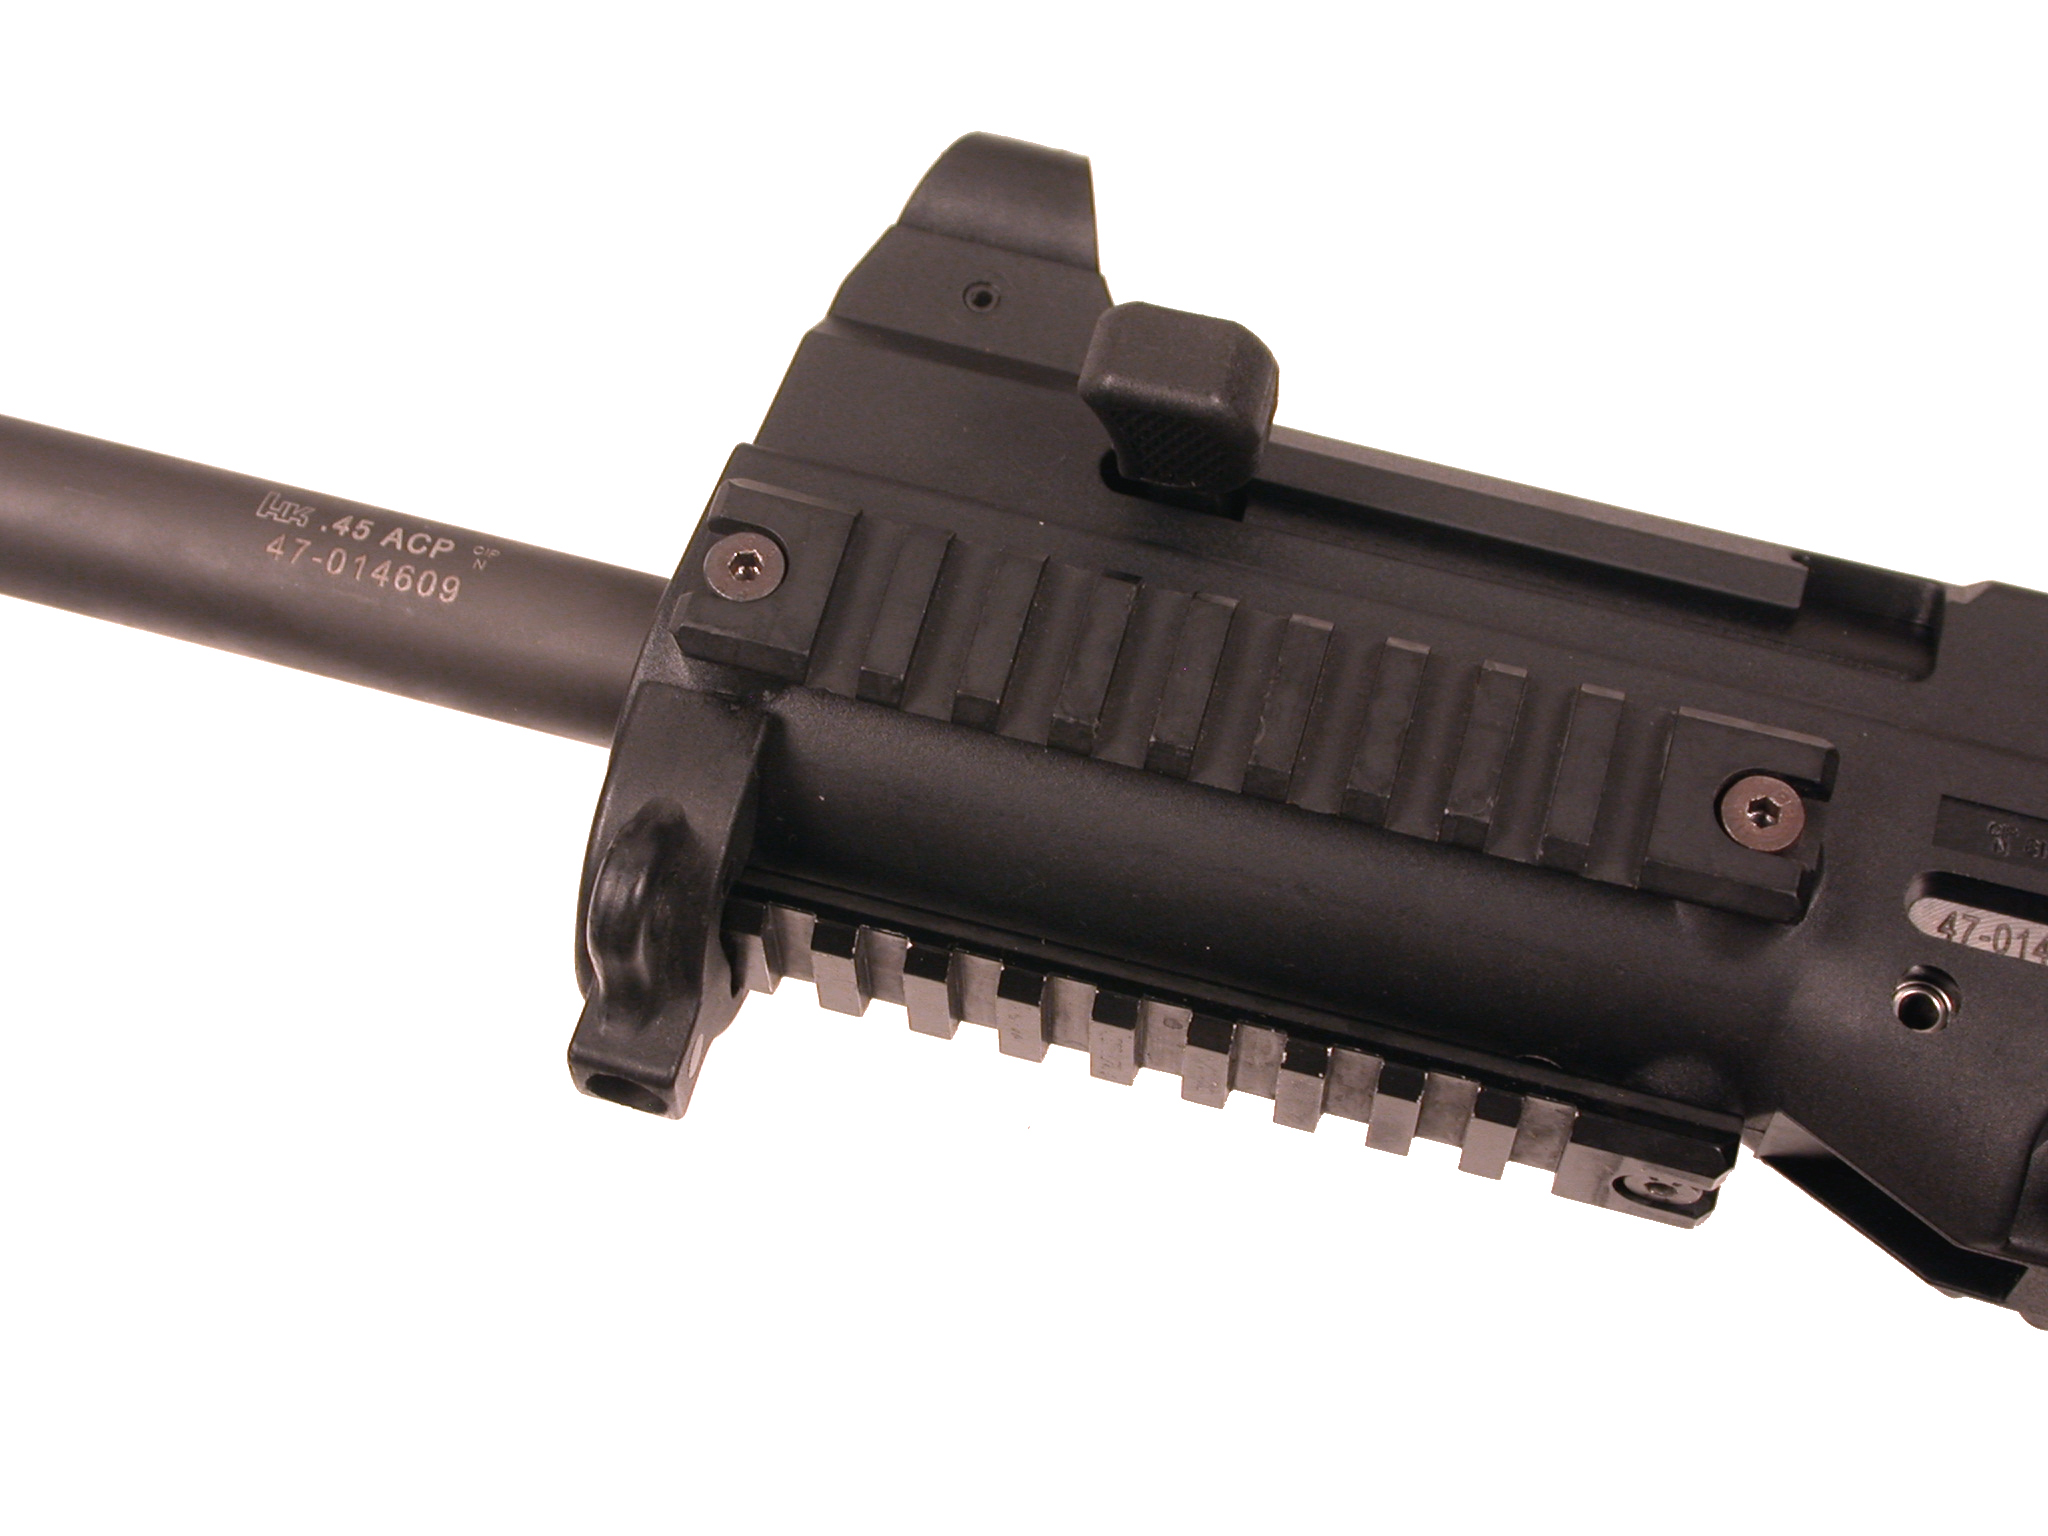 Optional accessory Picatinny rails available for easy mounting of optical sights, lights, and aiming devices.